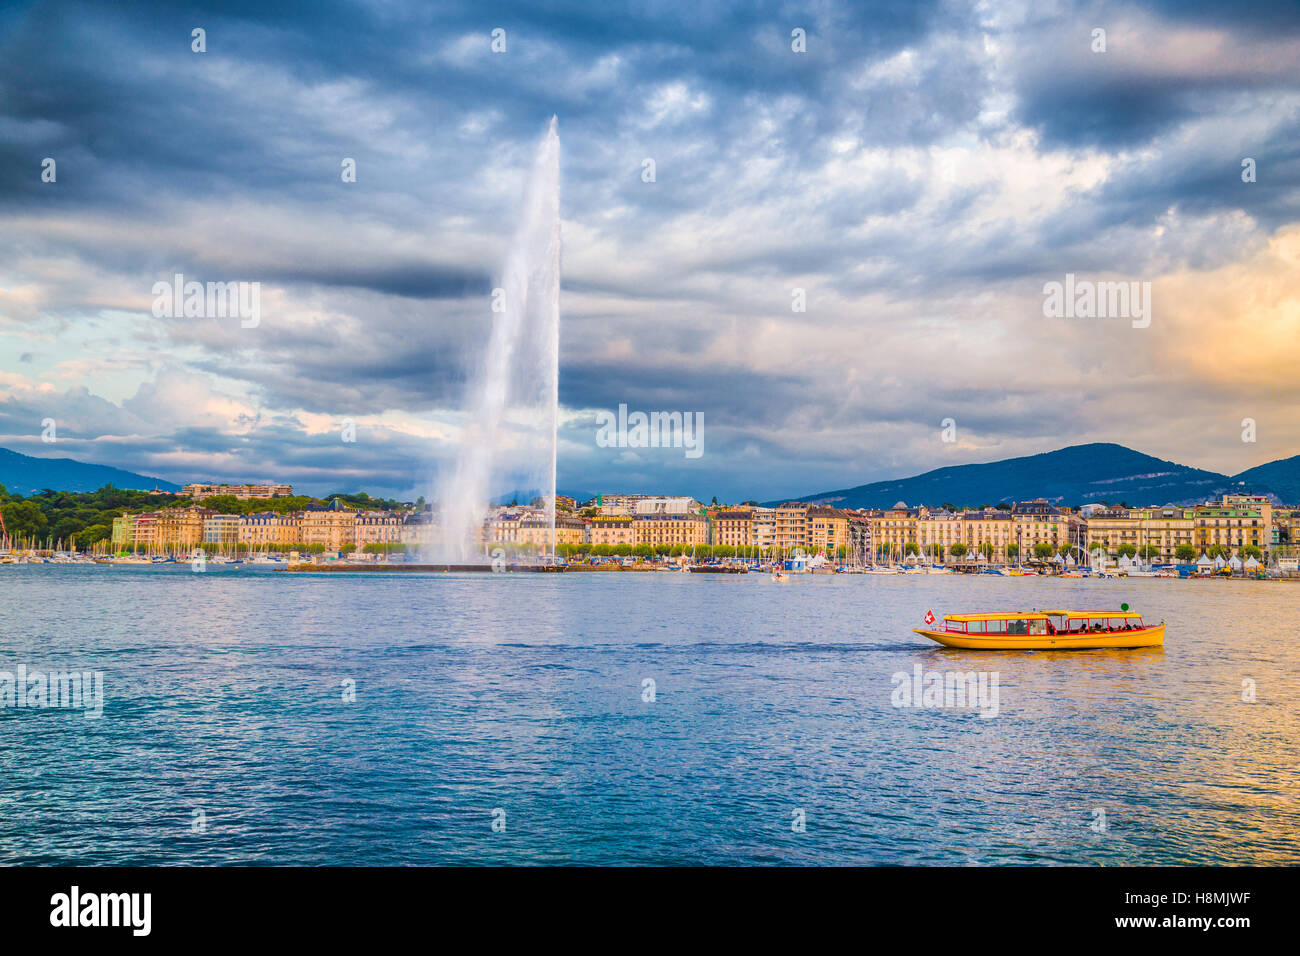 Classic view of Geneva skyline with famous Jet d'Eau fountain at Lake Geneva in beautiful evening light at sunset, Switzerland Stock Photo